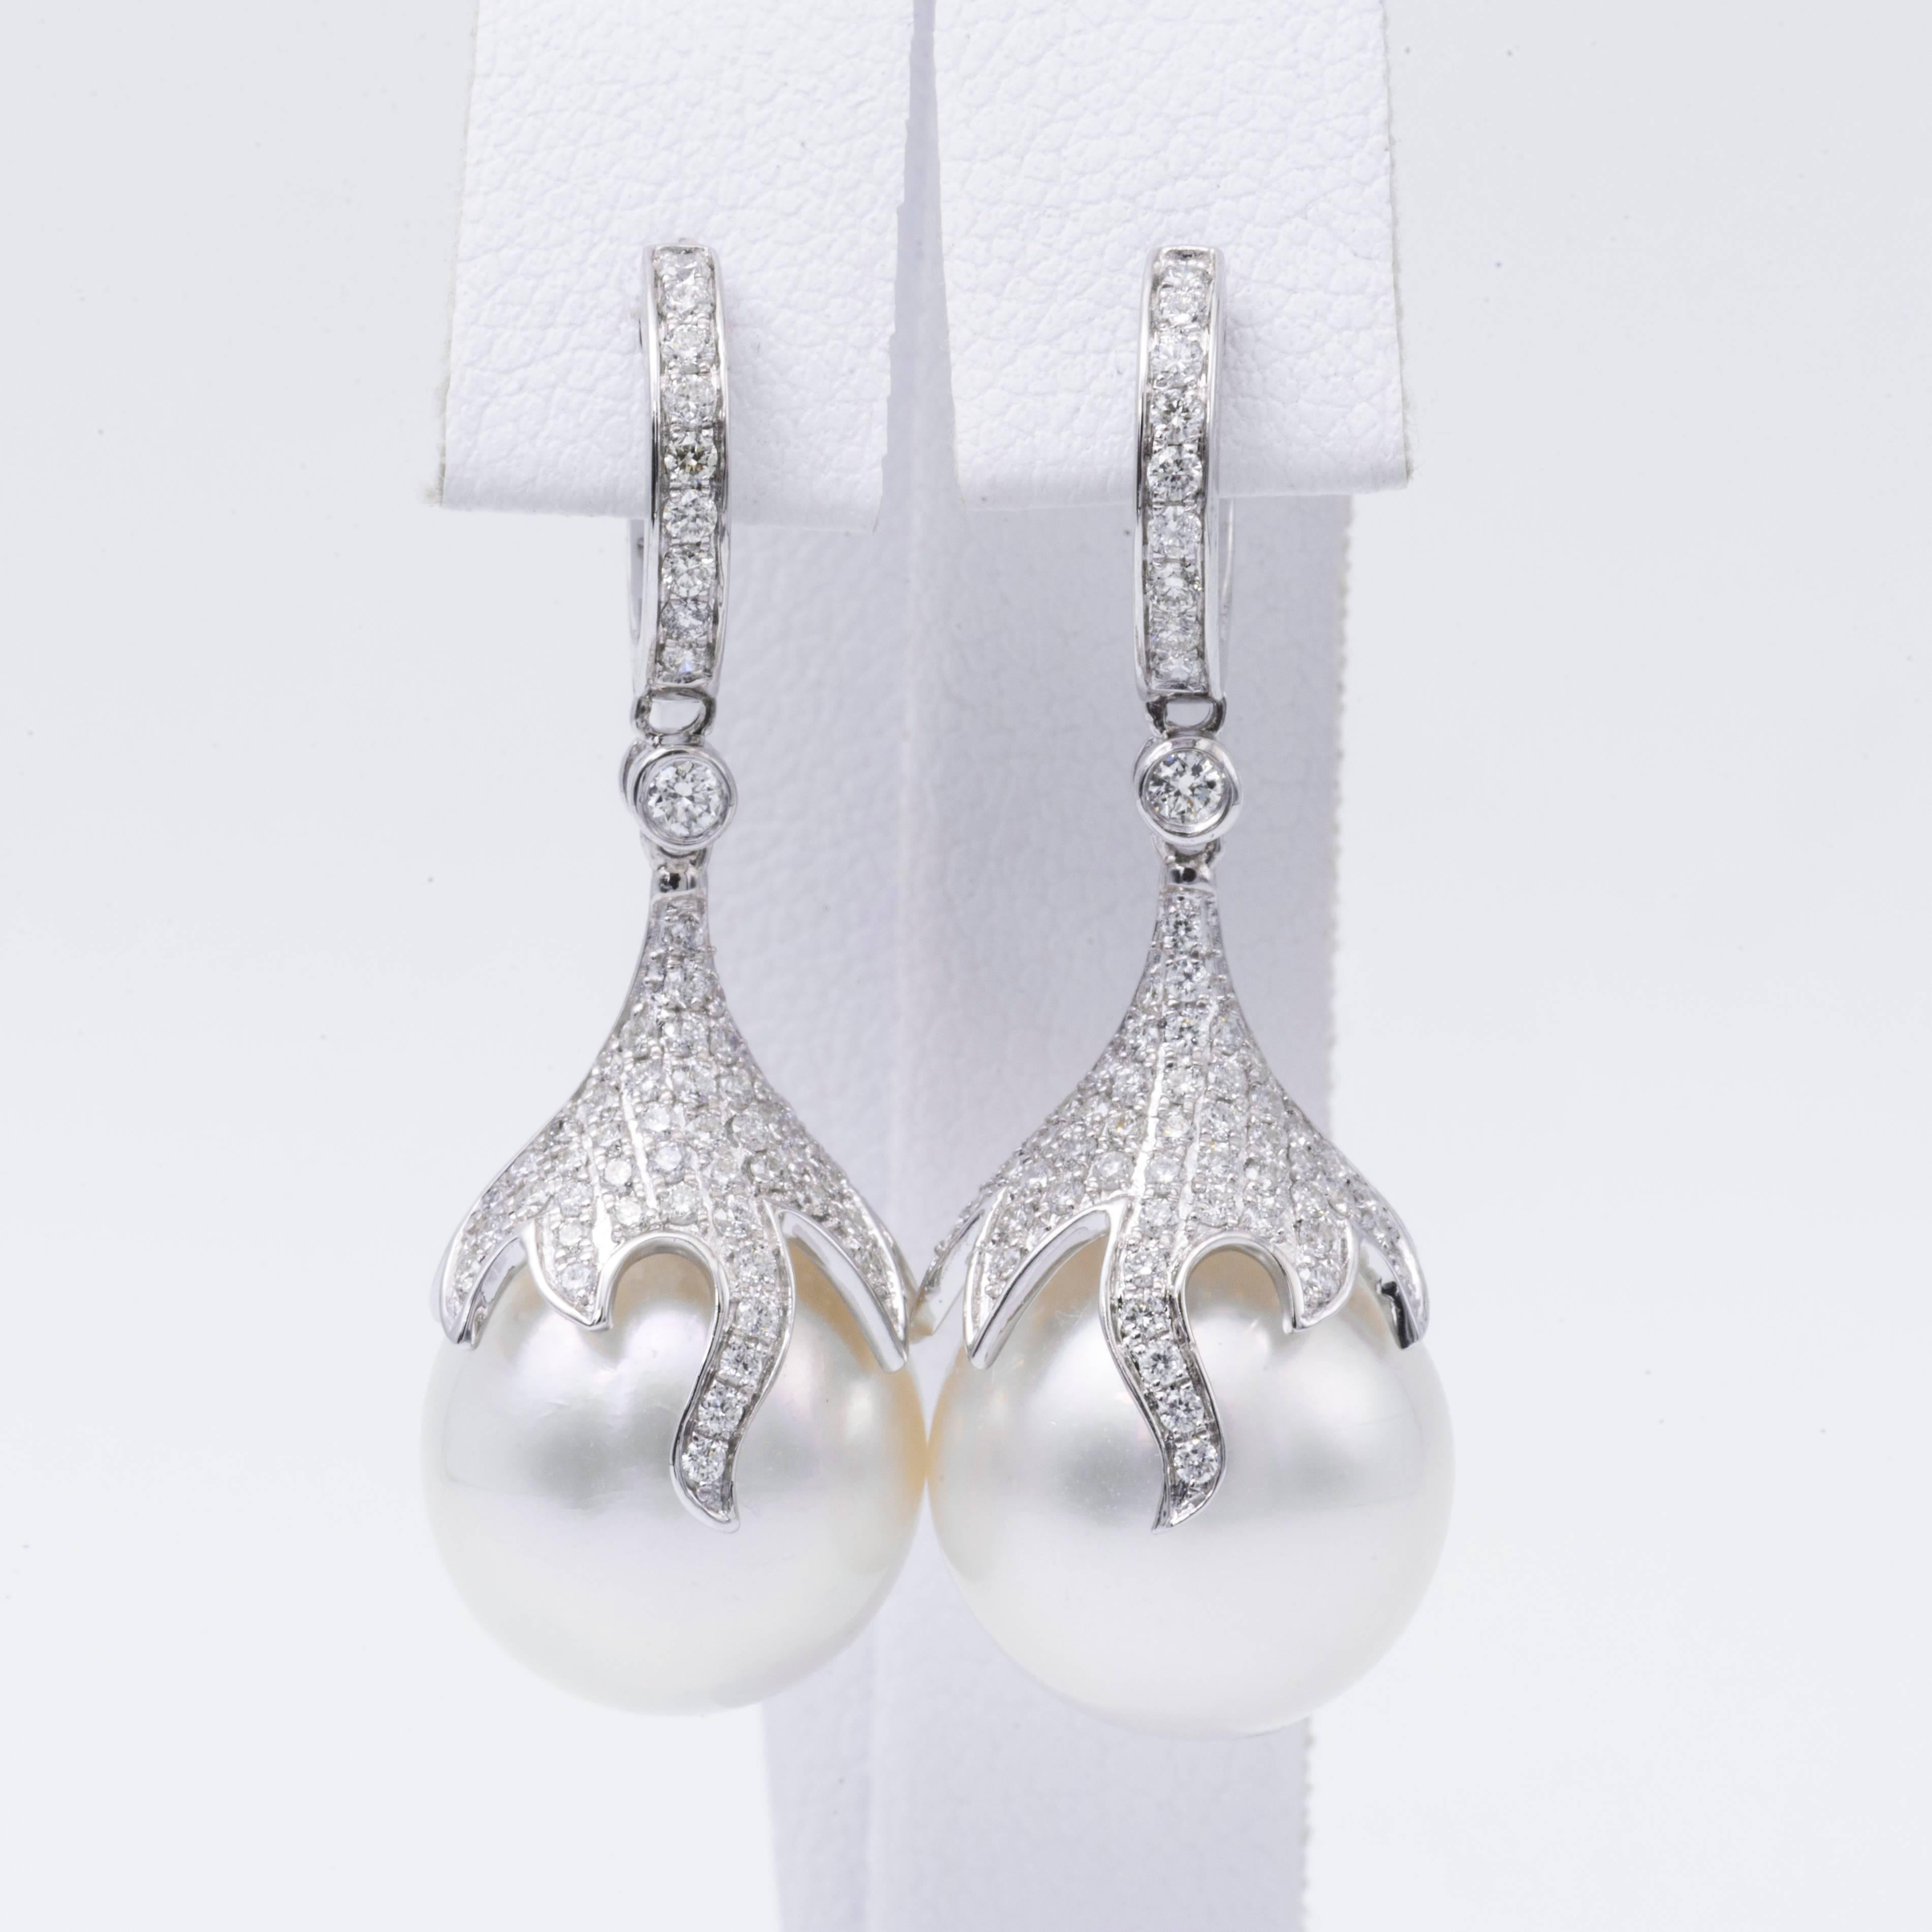 18K White gold drop earrings featuring two South Sea Pearls measuring 12-13 mm flanked with 122 round brilliants weighing 0.73 carats.

Pearl Quality AA
Luster AA, Excellent
Nacre Very Thick